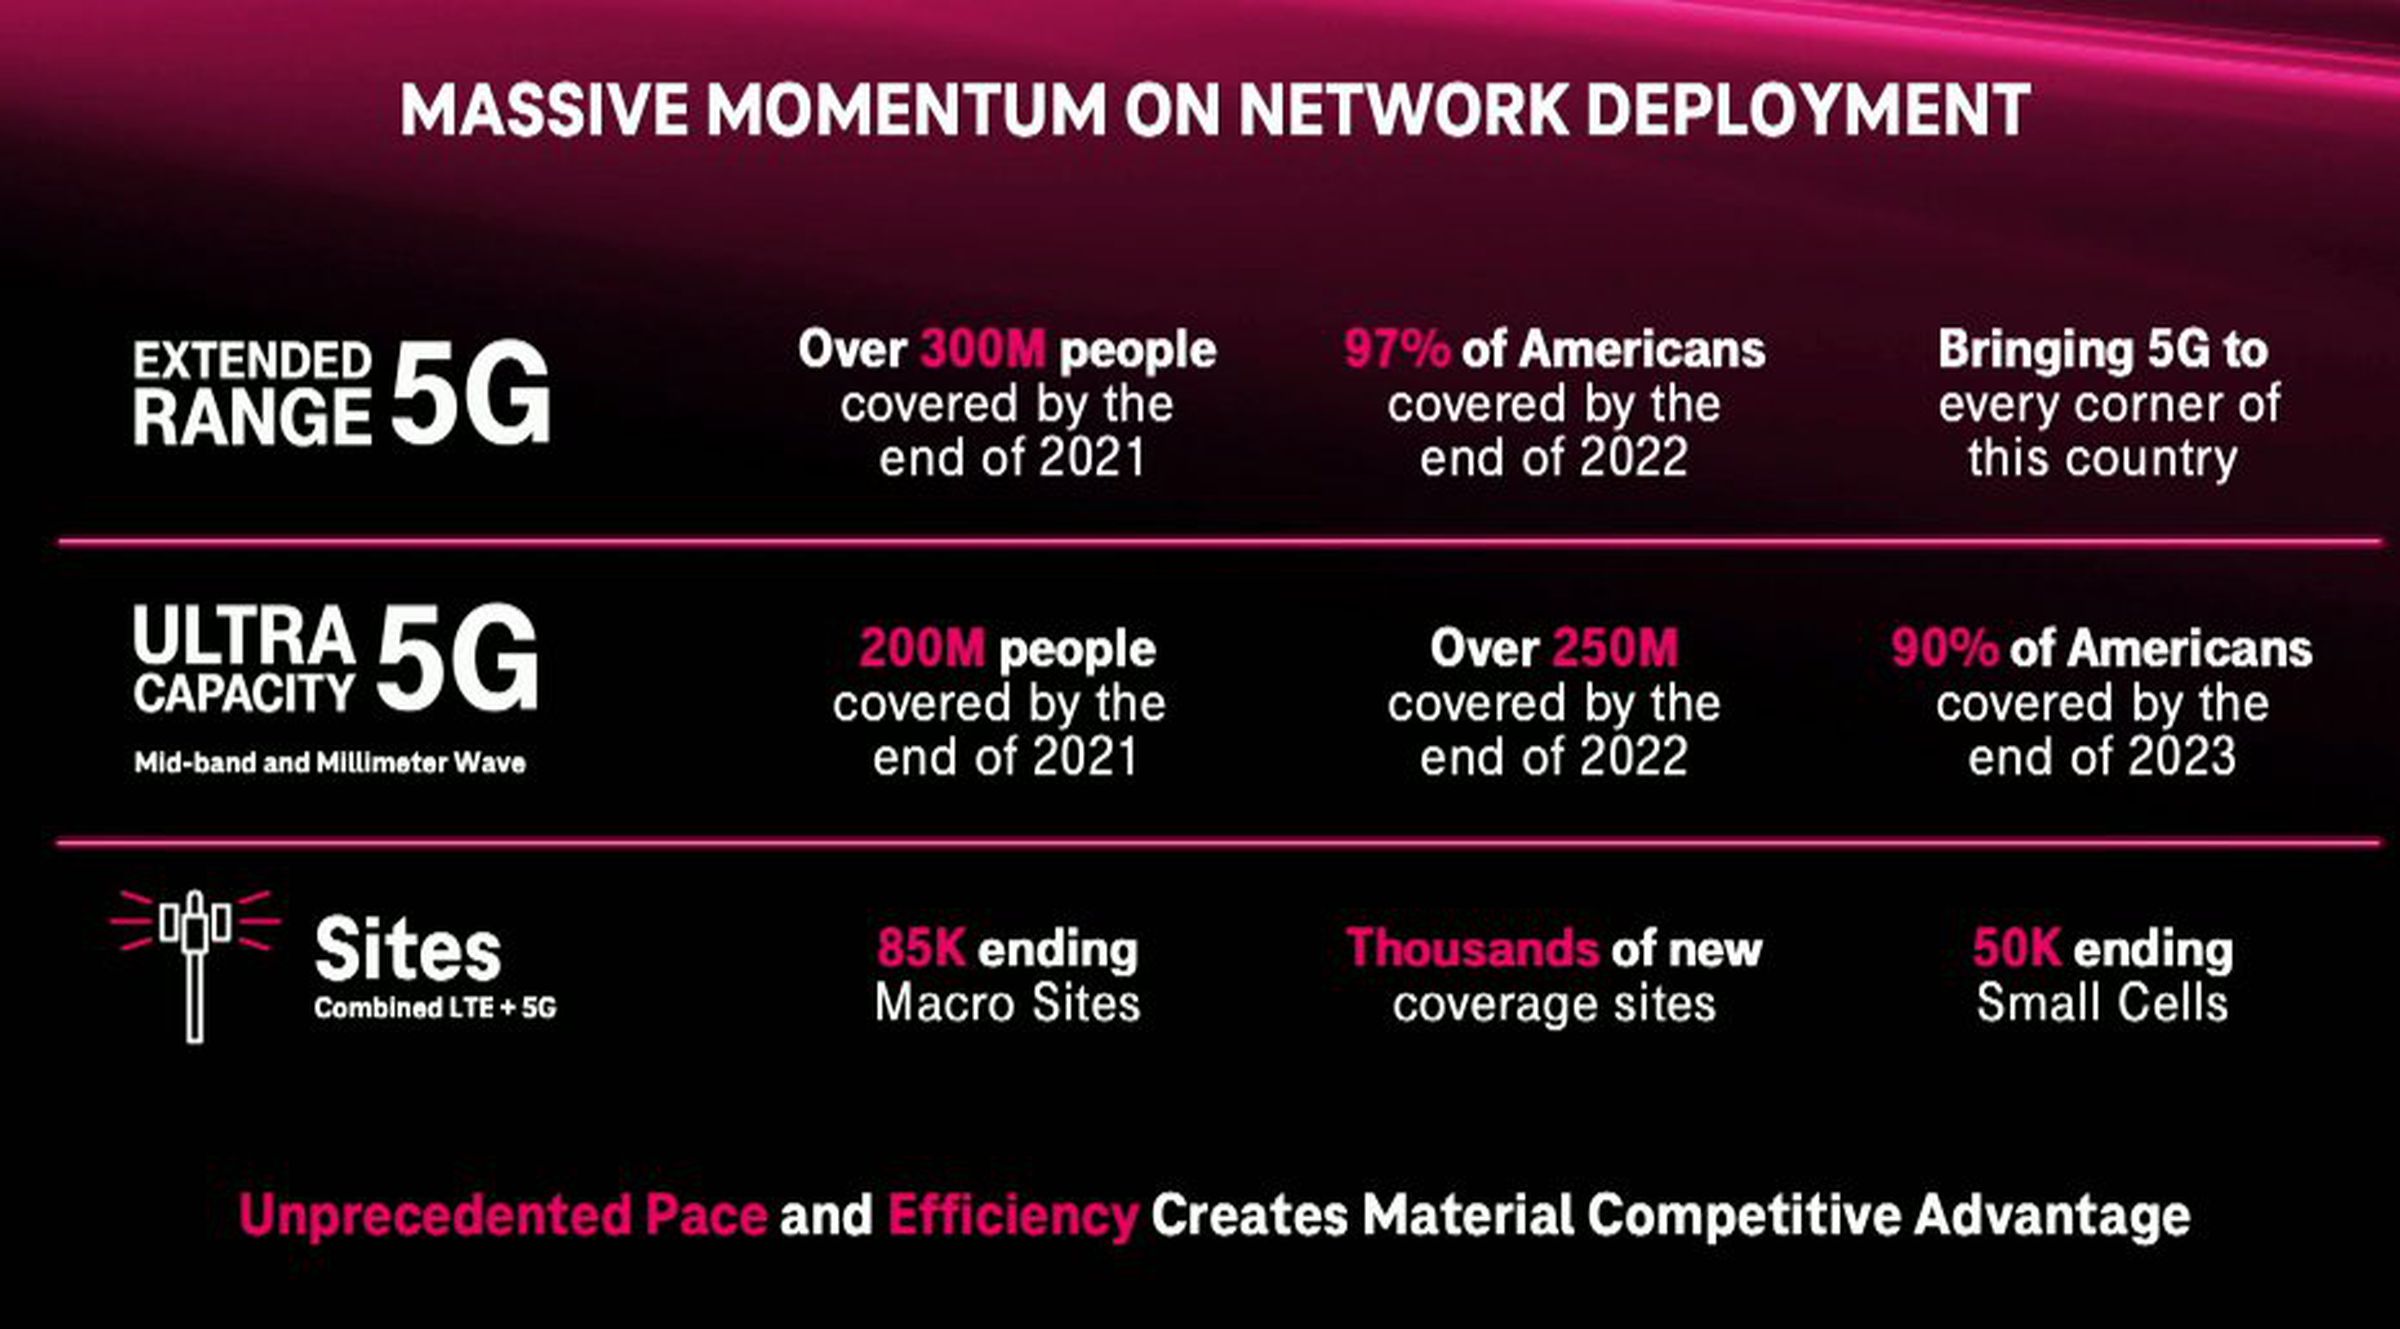 T-Mobile’s C-band acquisition figures into expansion plans starting in 2023.